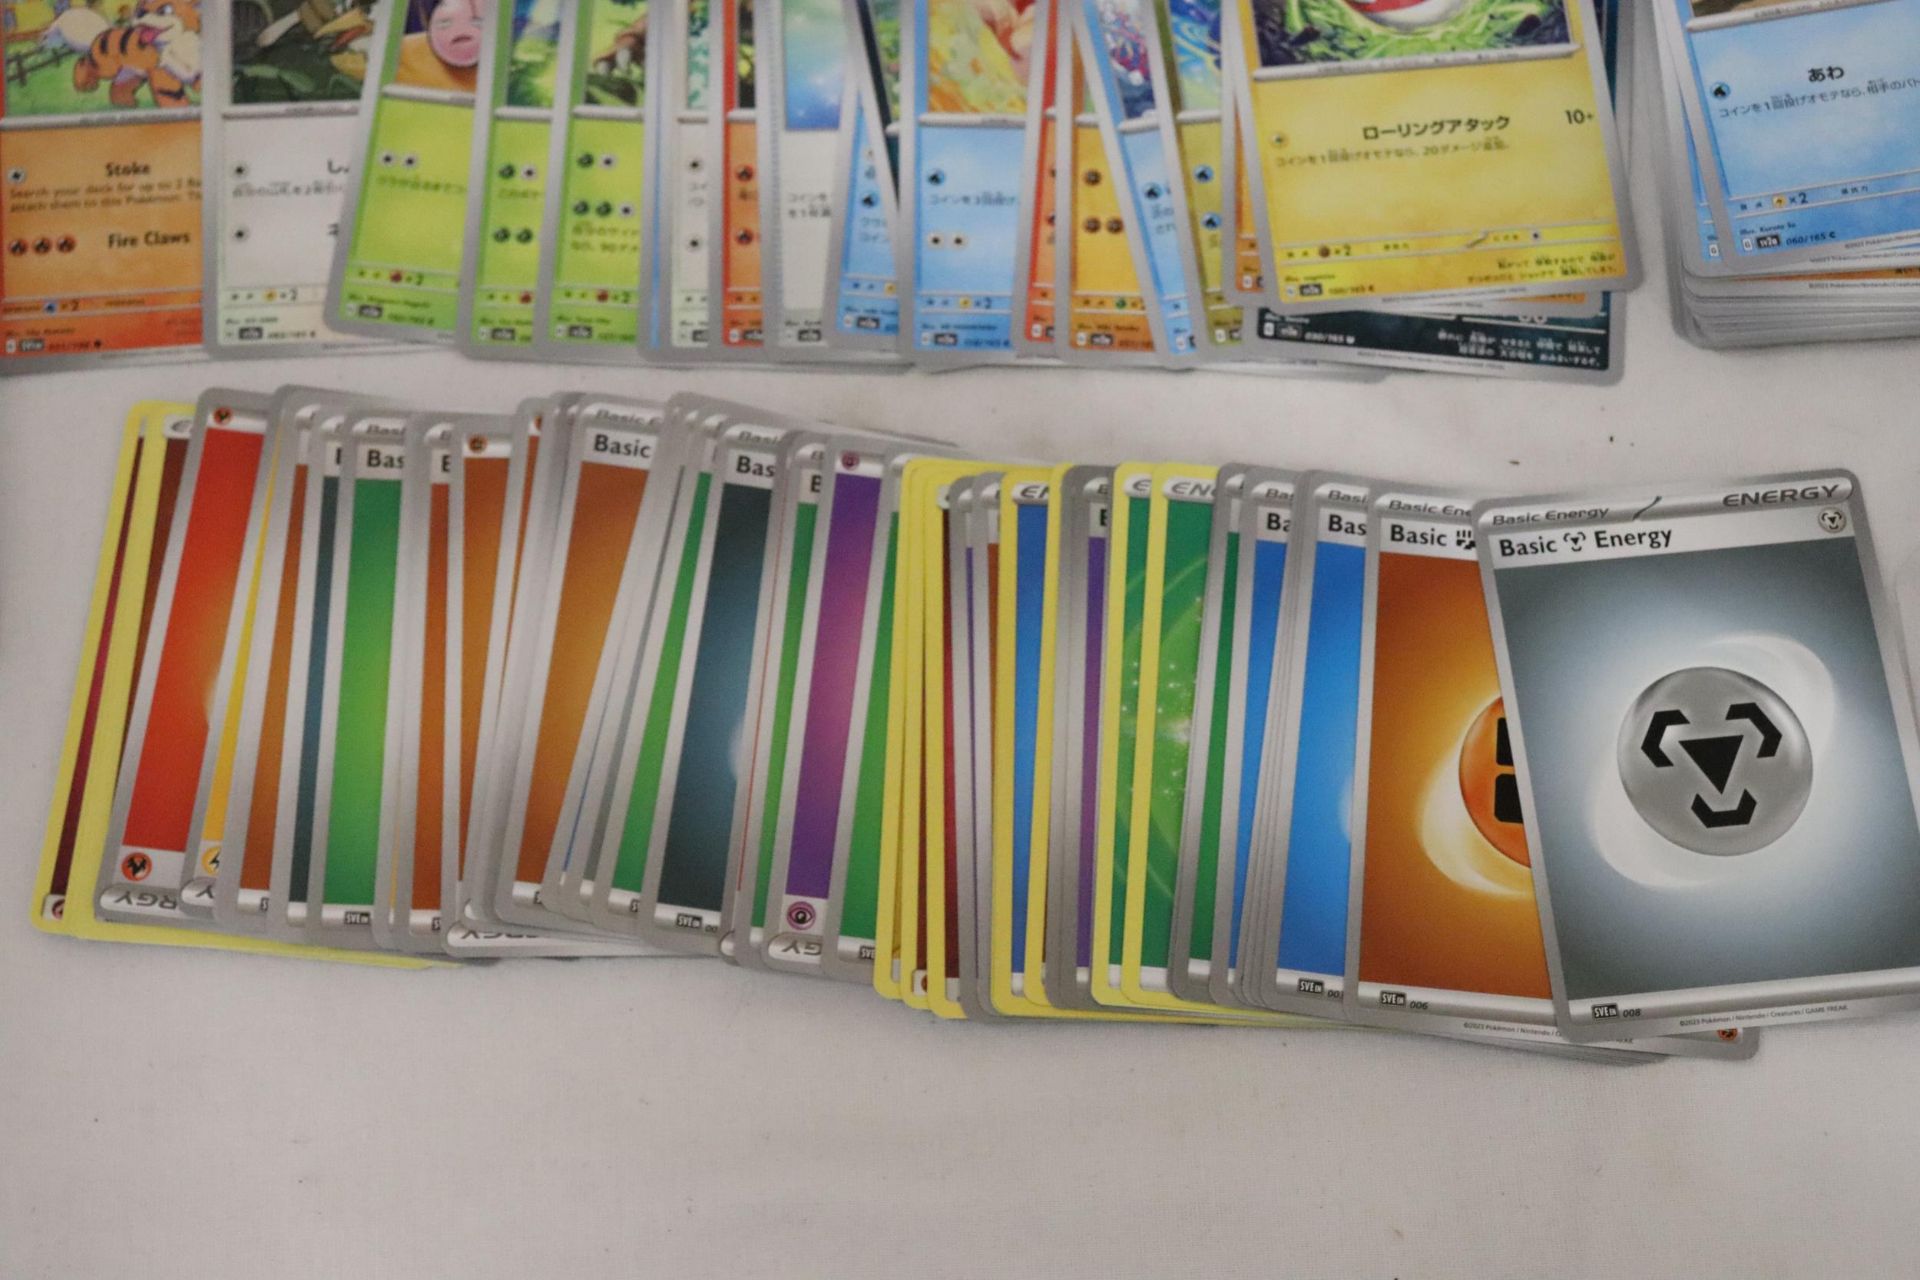 A POKEMON COLLECTOR'S TIN FULL OF JAPANESE CARDS - Image 5 of 8